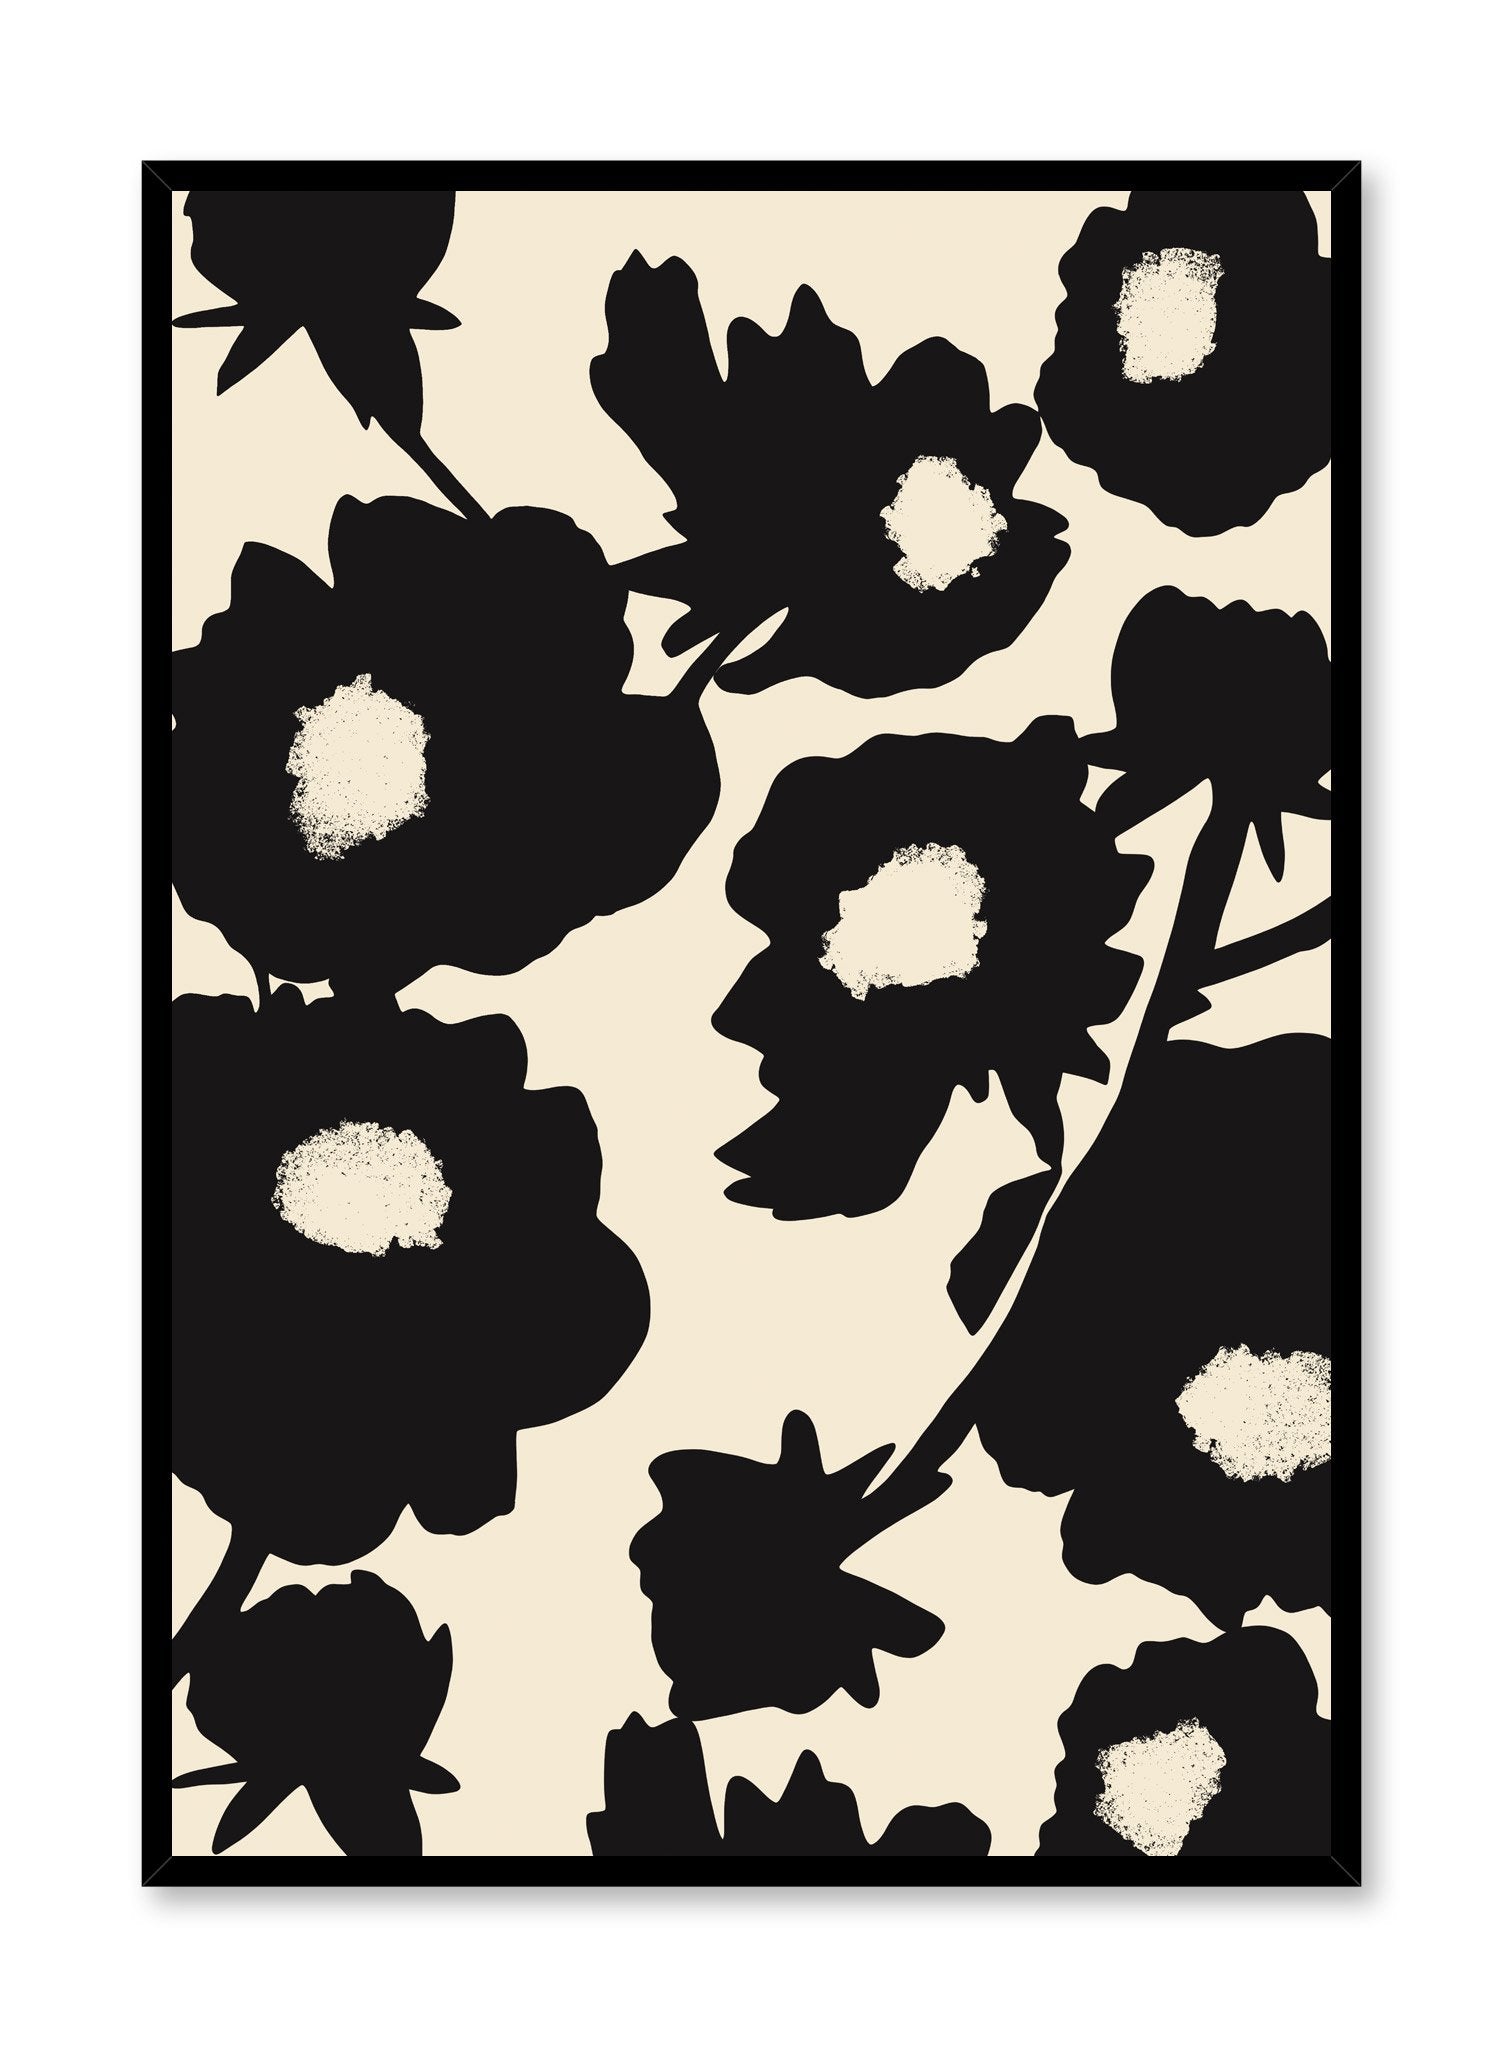 "Flower Bush" is a minimalist illustration poster by Opposite Wall in black and beige of abstract branch inspired by French painter Henri Matisse.